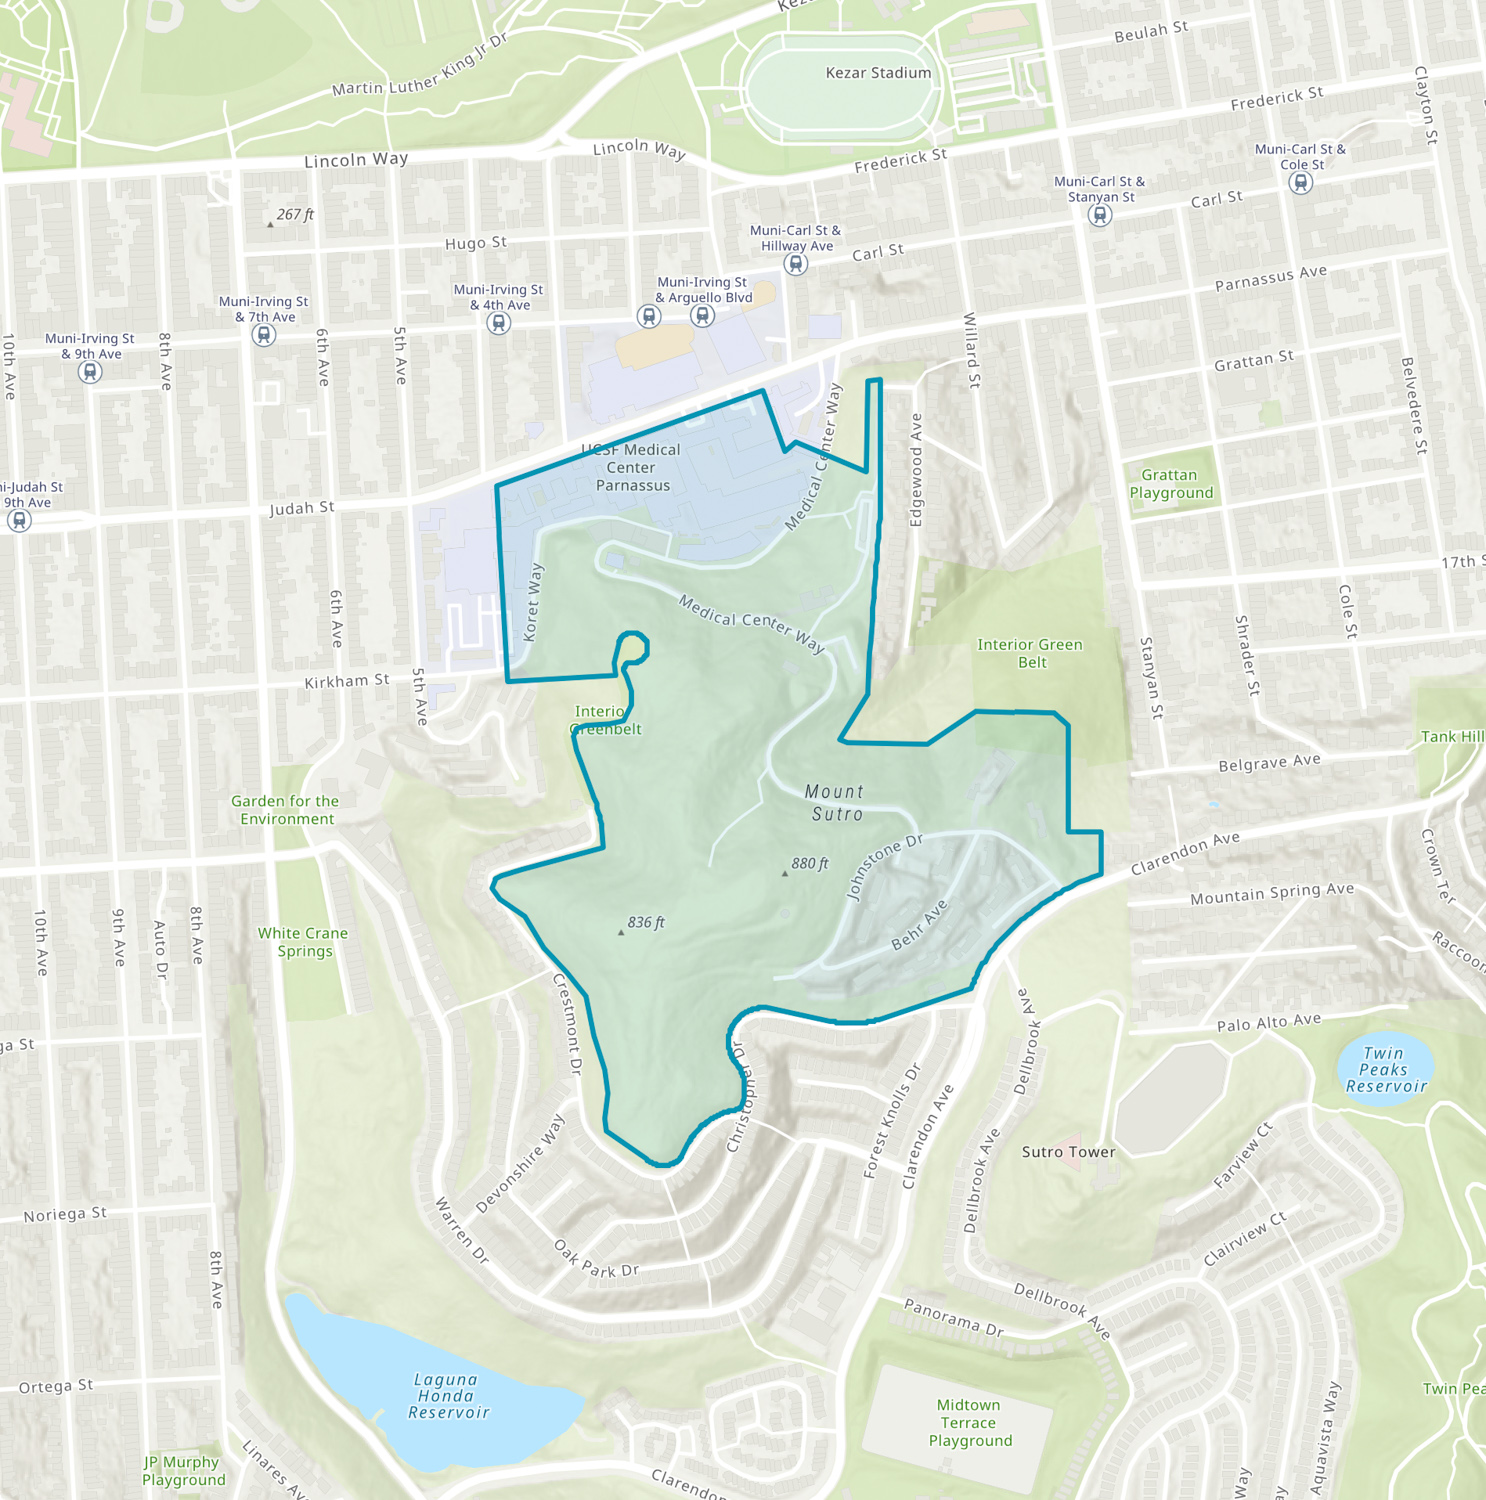 UCSF Parnassus Heights map, image via San Francisco Planning Department